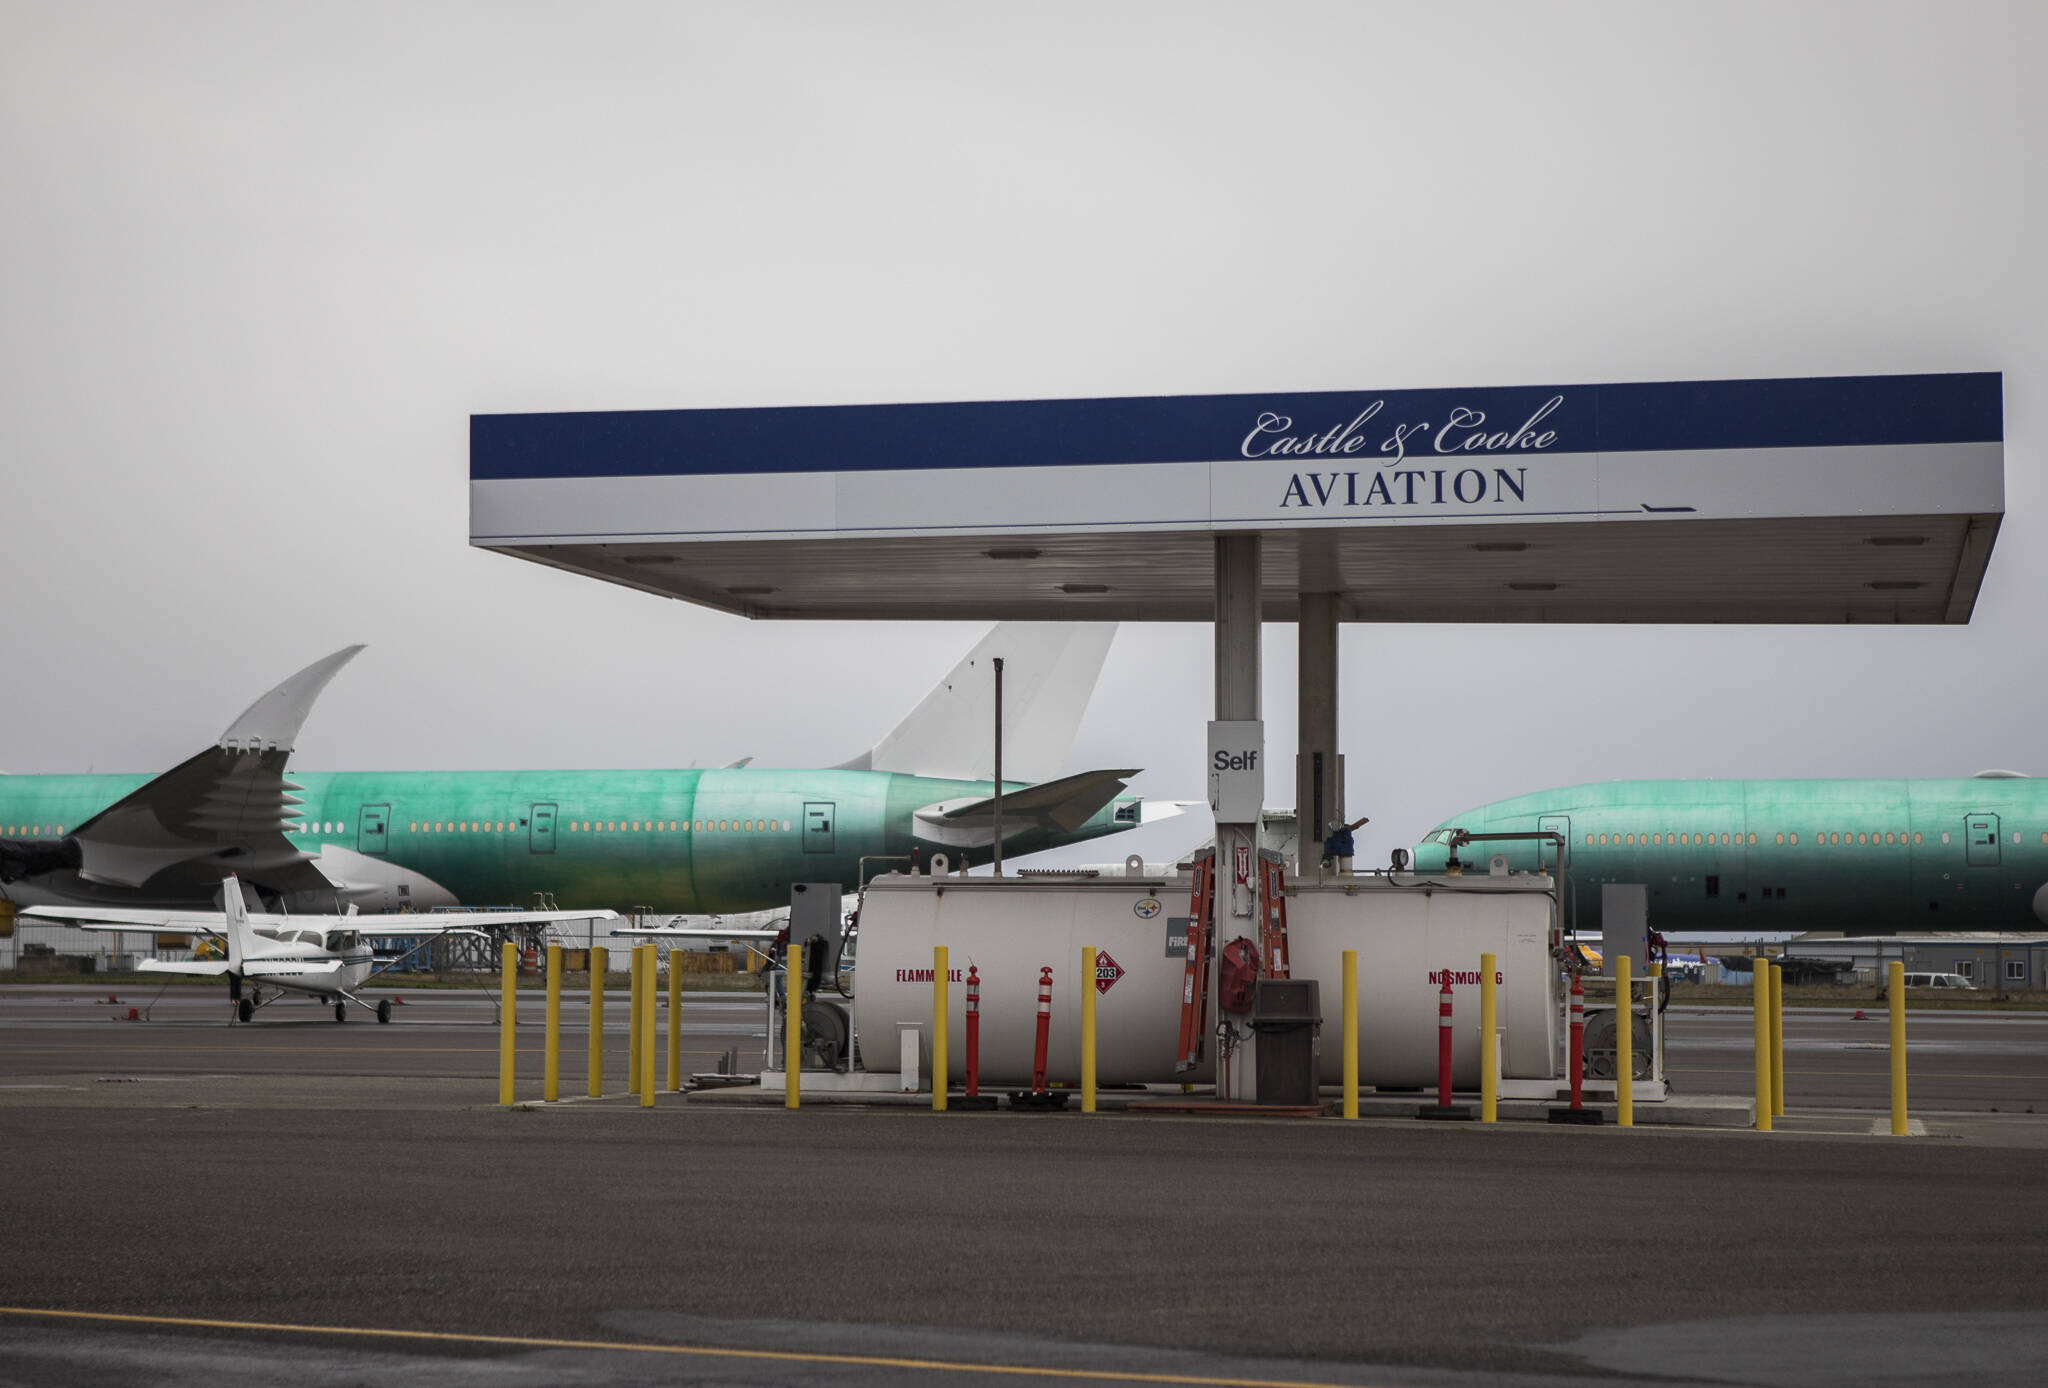 The Castle & Cooke fueling station at Paine Field in Everett. (Olivia Vanni / The Herald)